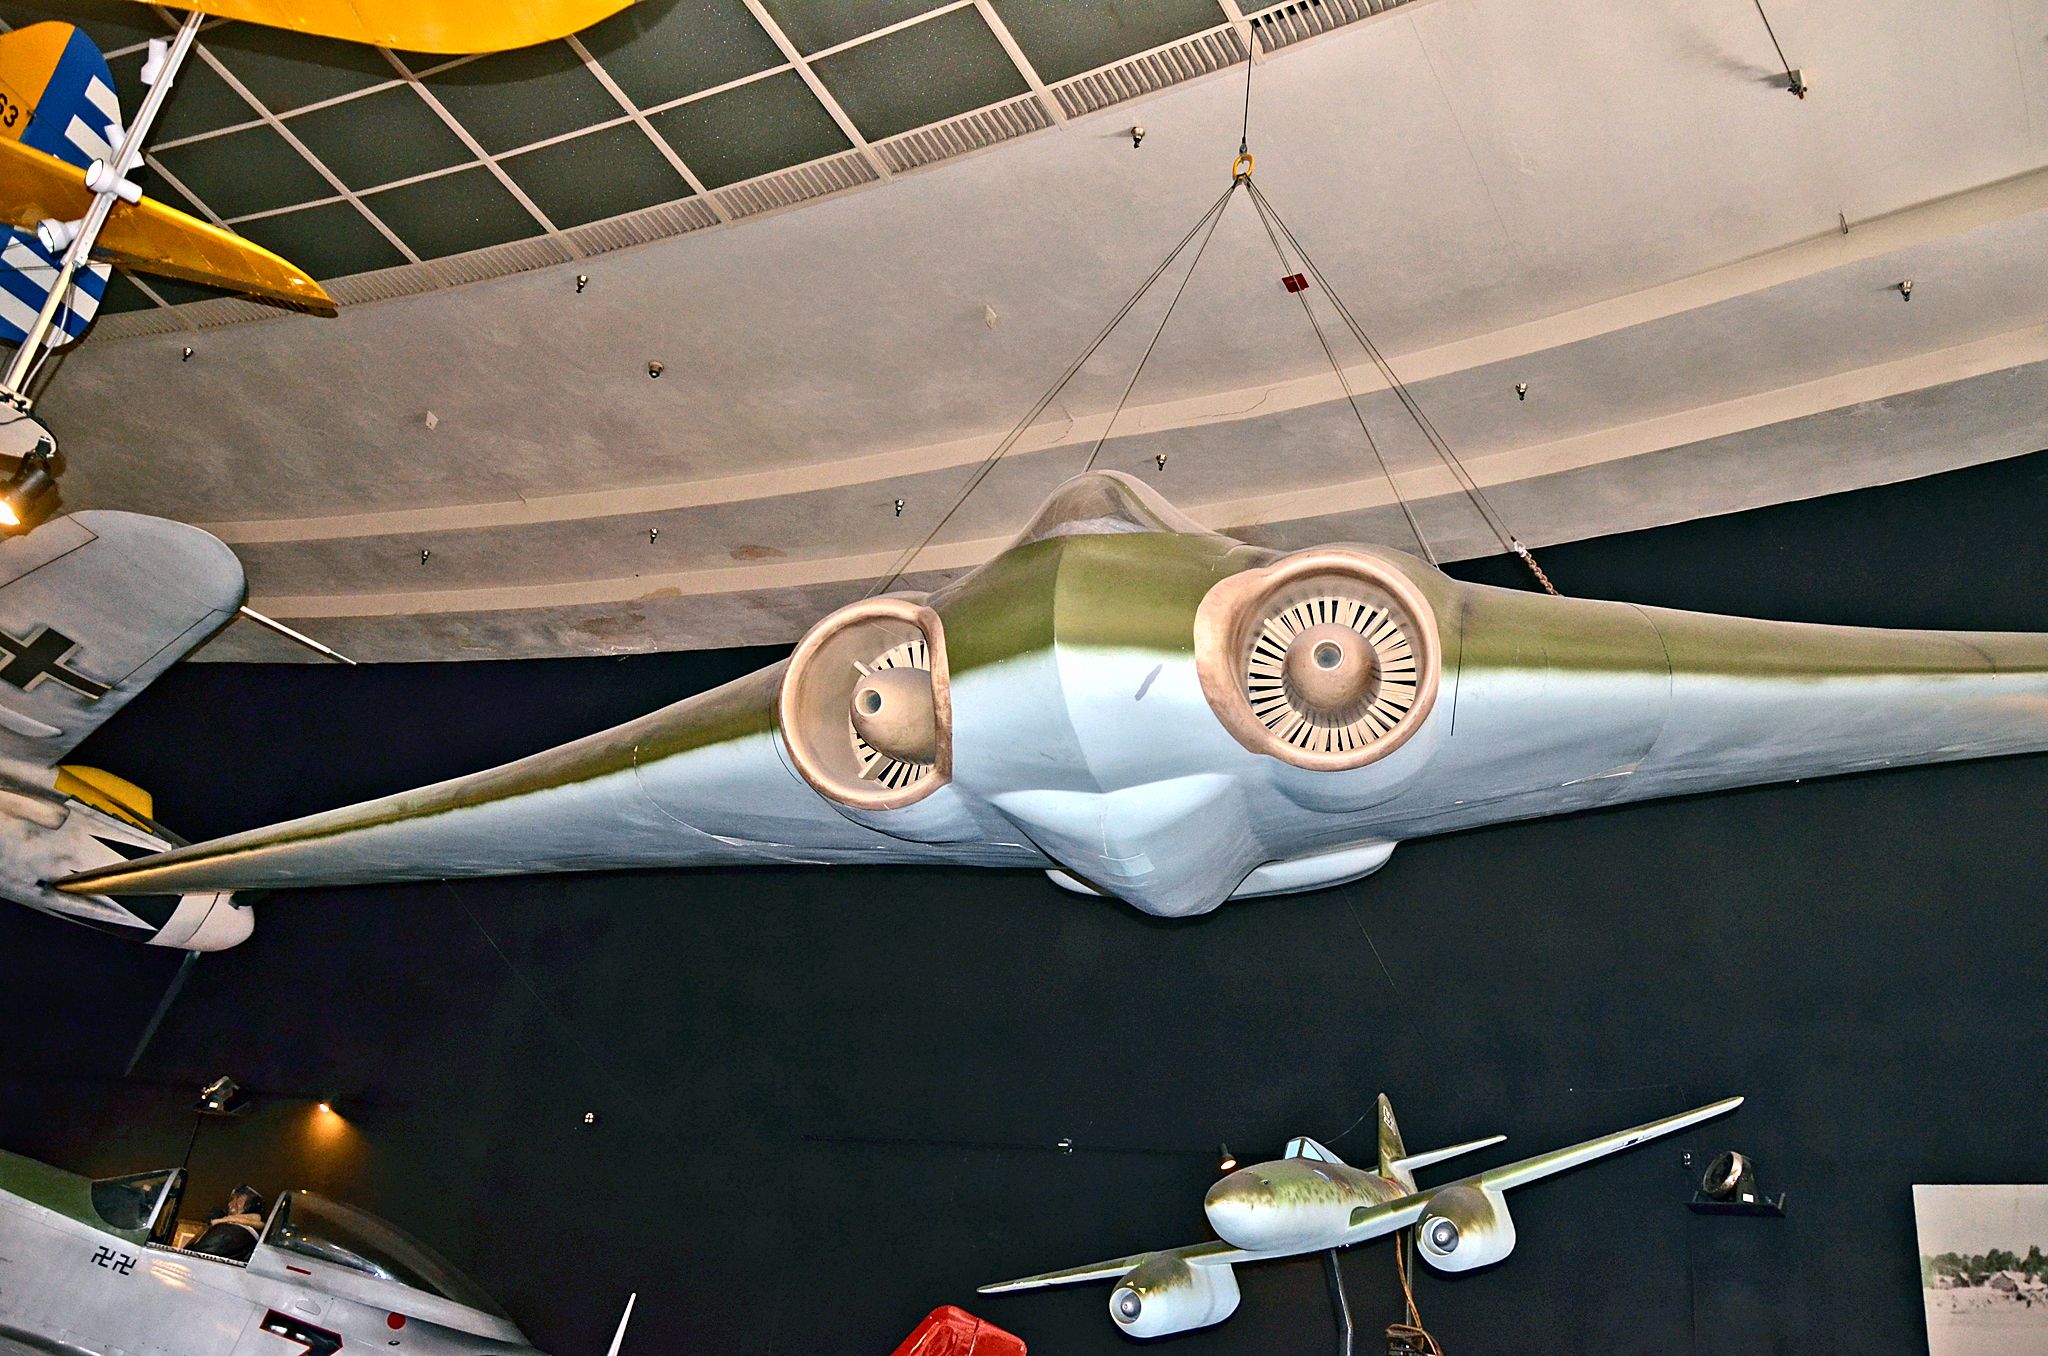 Horton Ho 229 IX V3 on display in a museum.